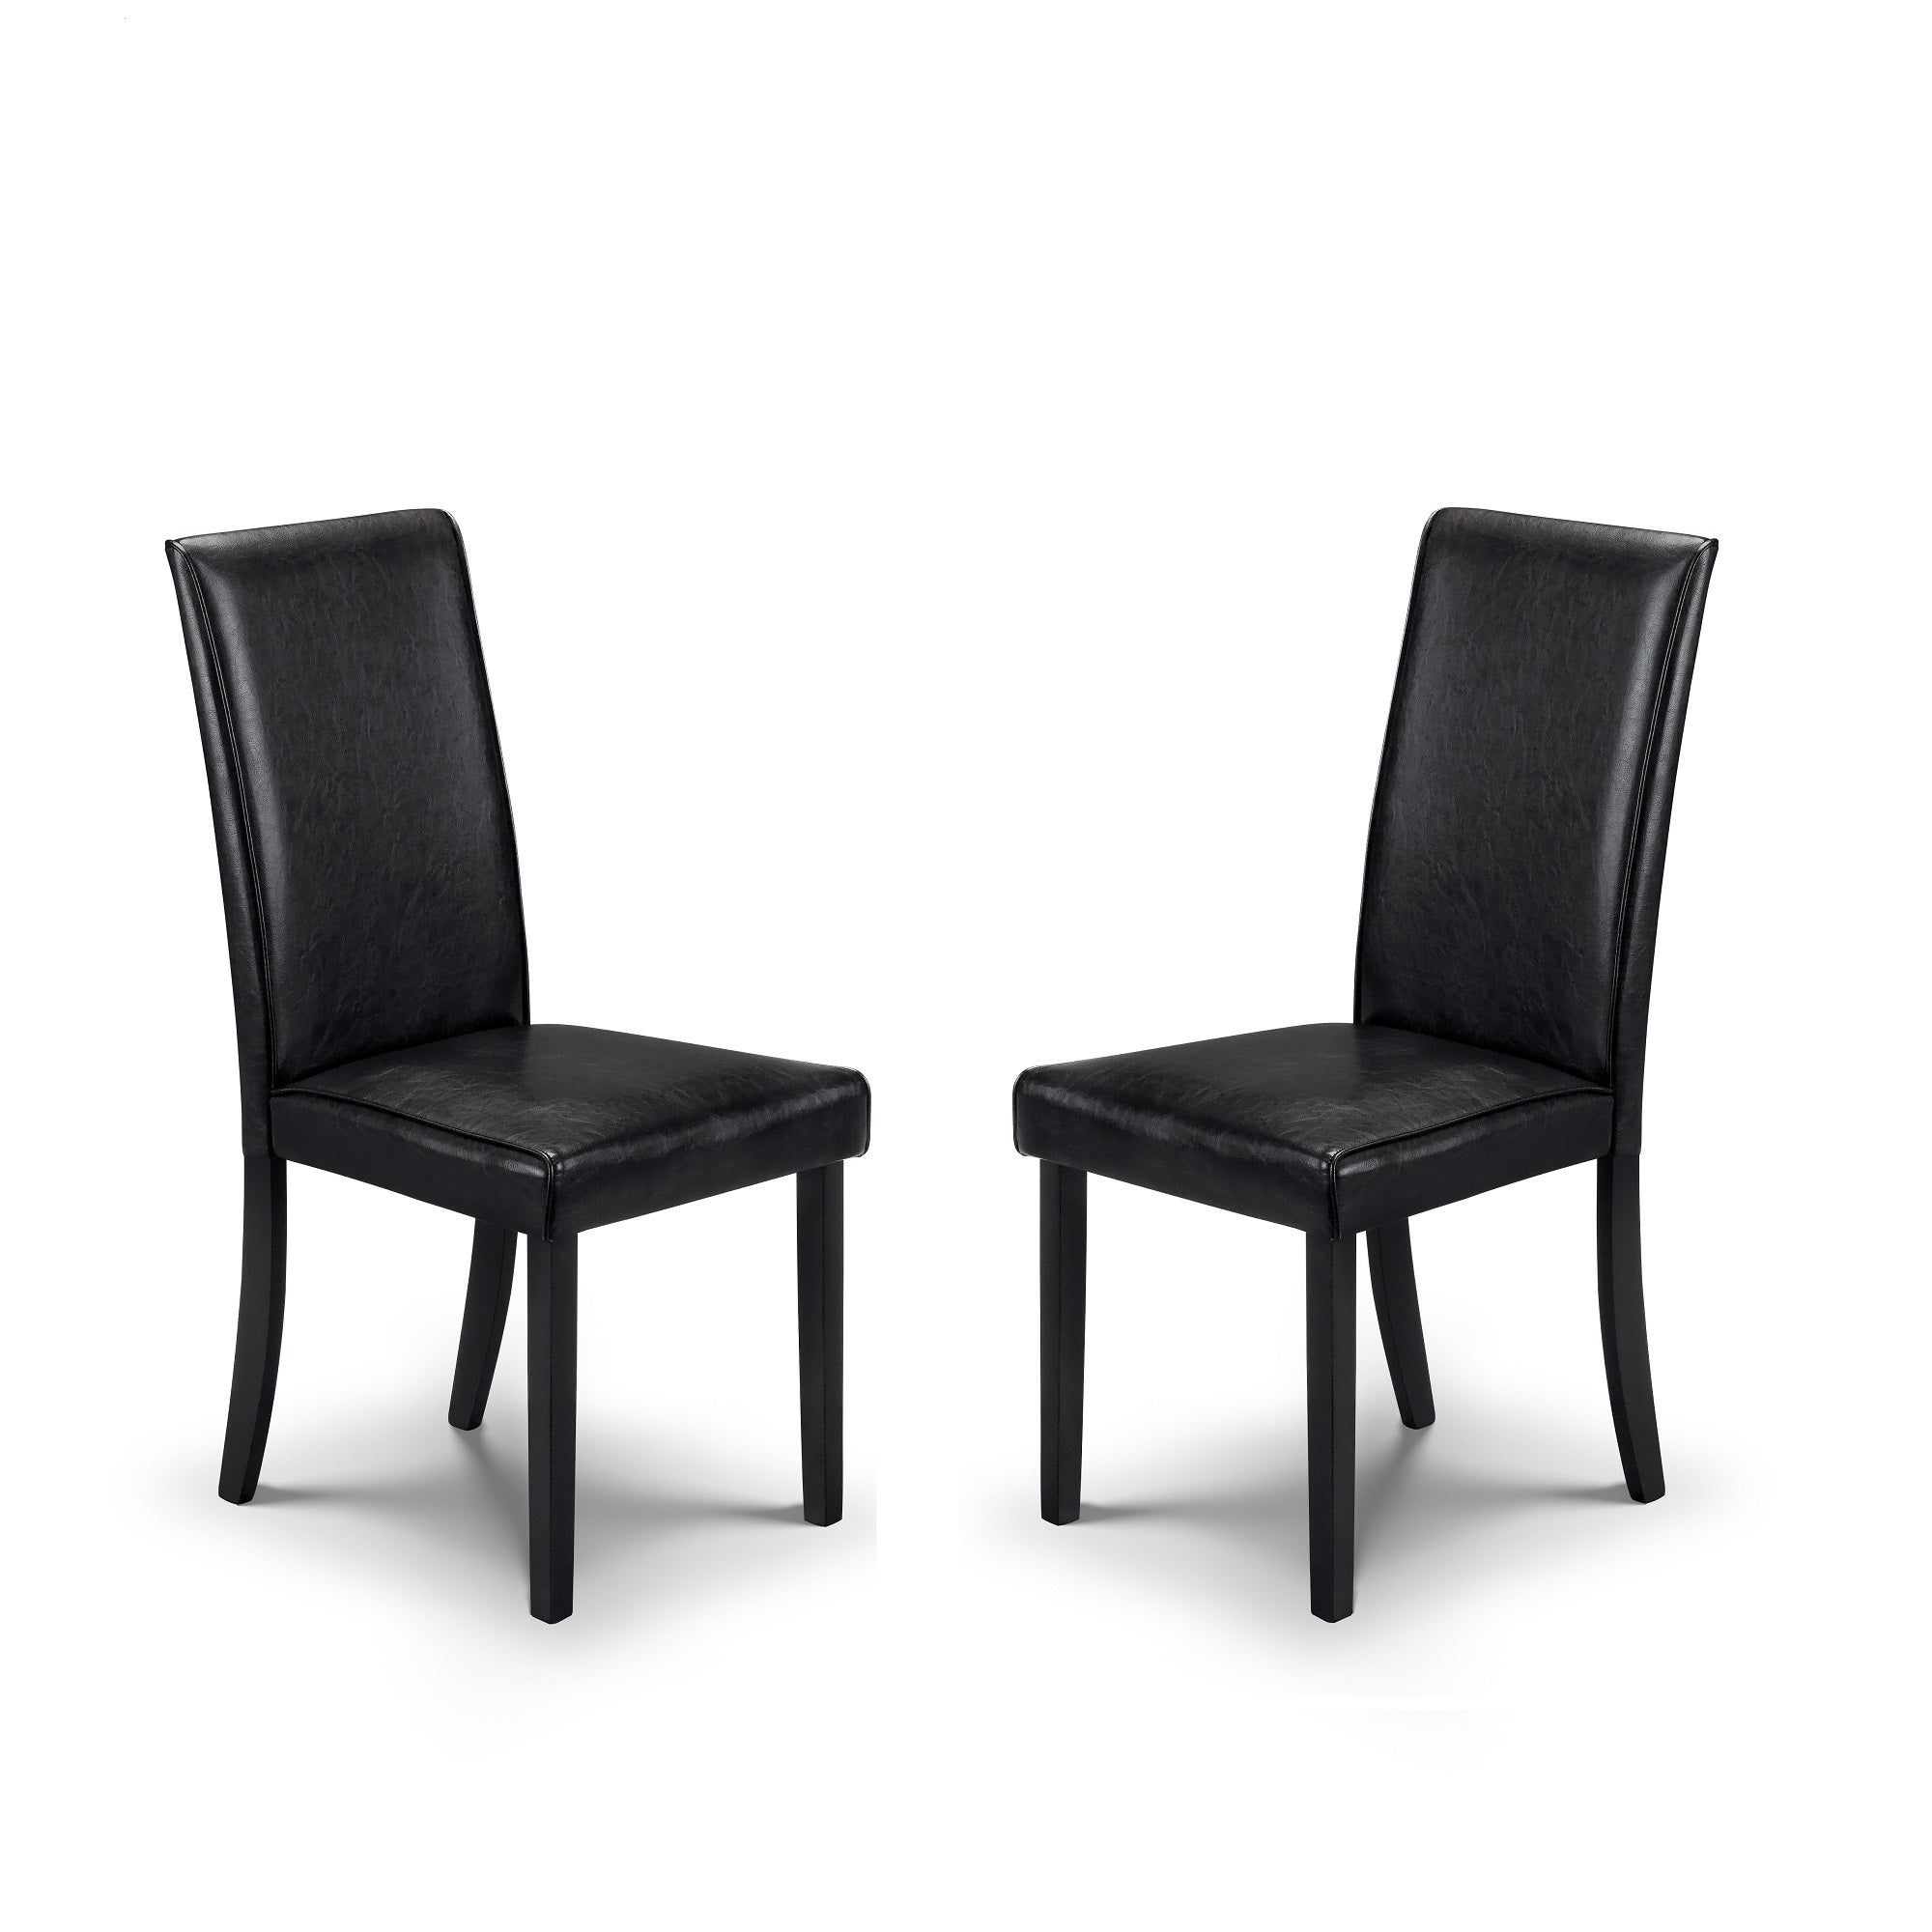 Hudson Set Of 2 Dining Chairs, Faux Leather